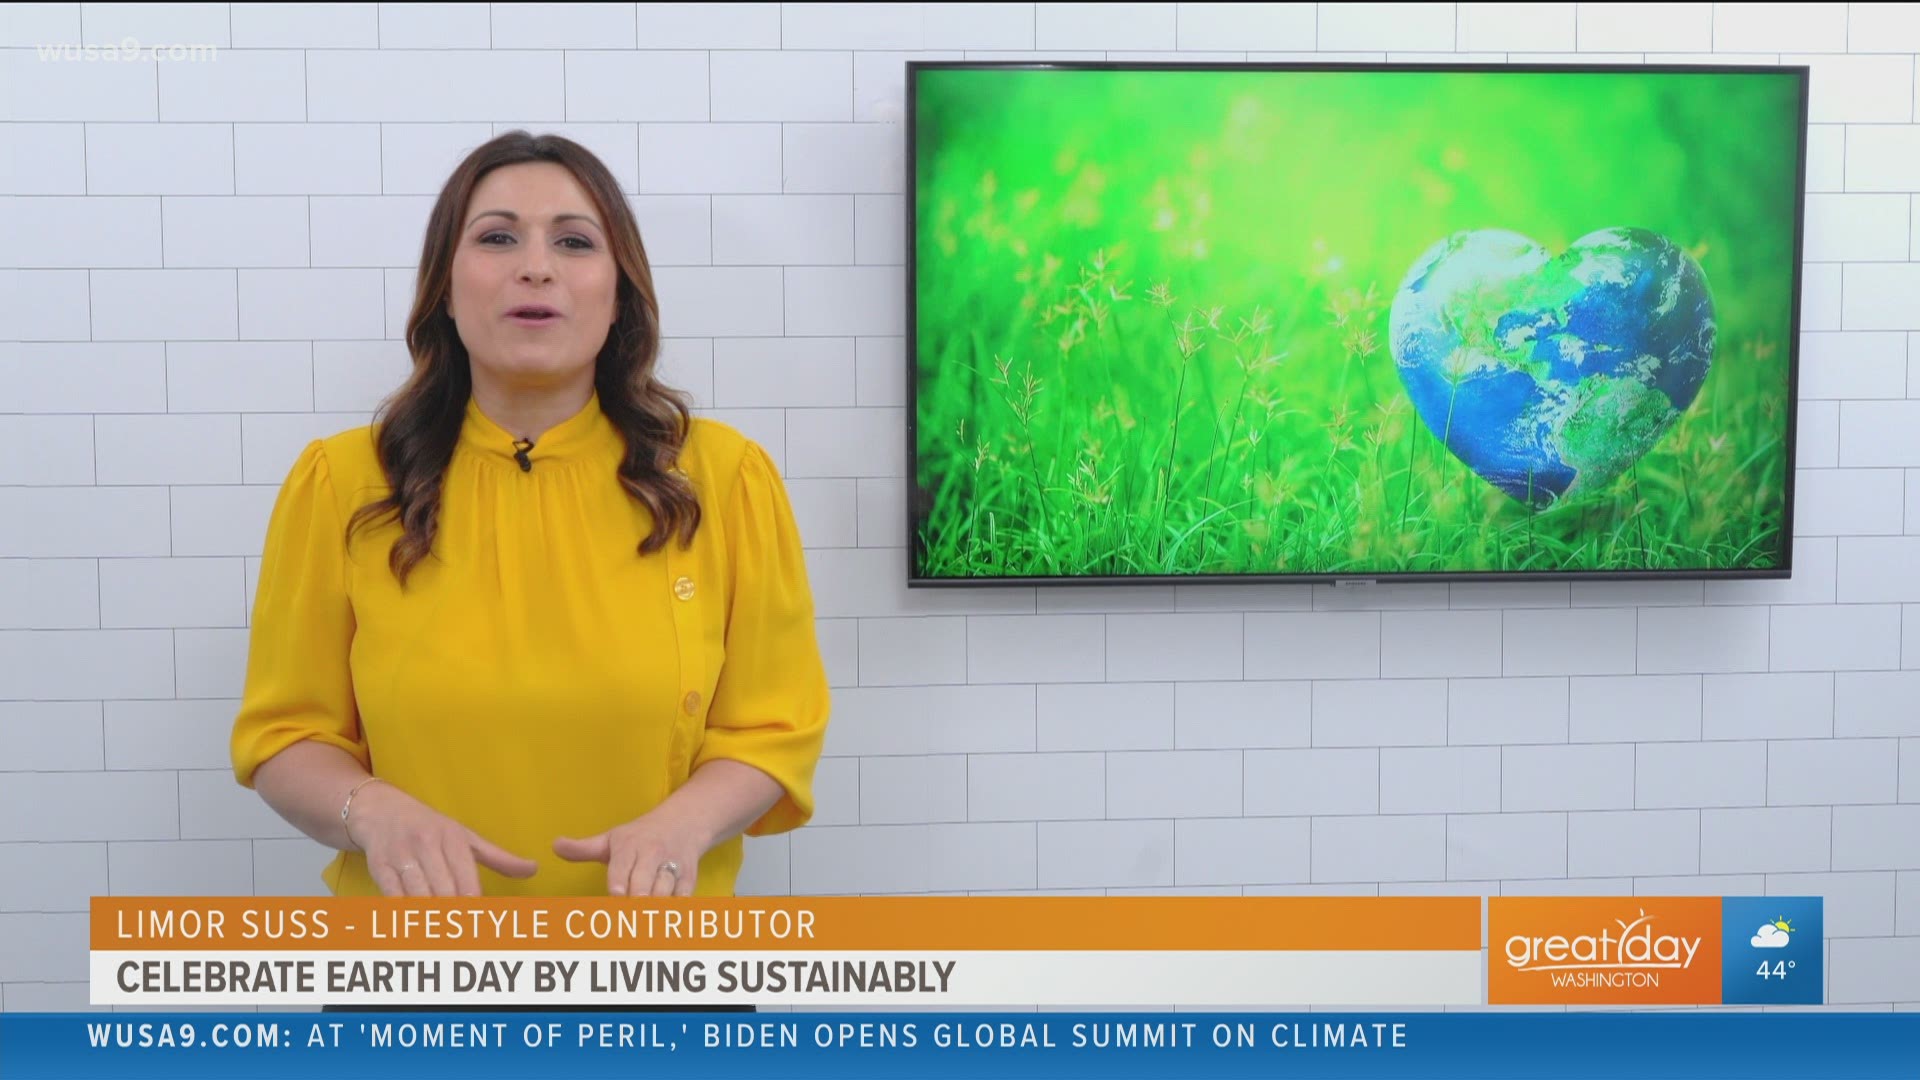 On Earth Day, Limor Suss shares eco-friendly products to promote sustainable living. Sponsored by LS Media, SodaStream, Pukka Herbs, Garnier, Rhyme and Reason.